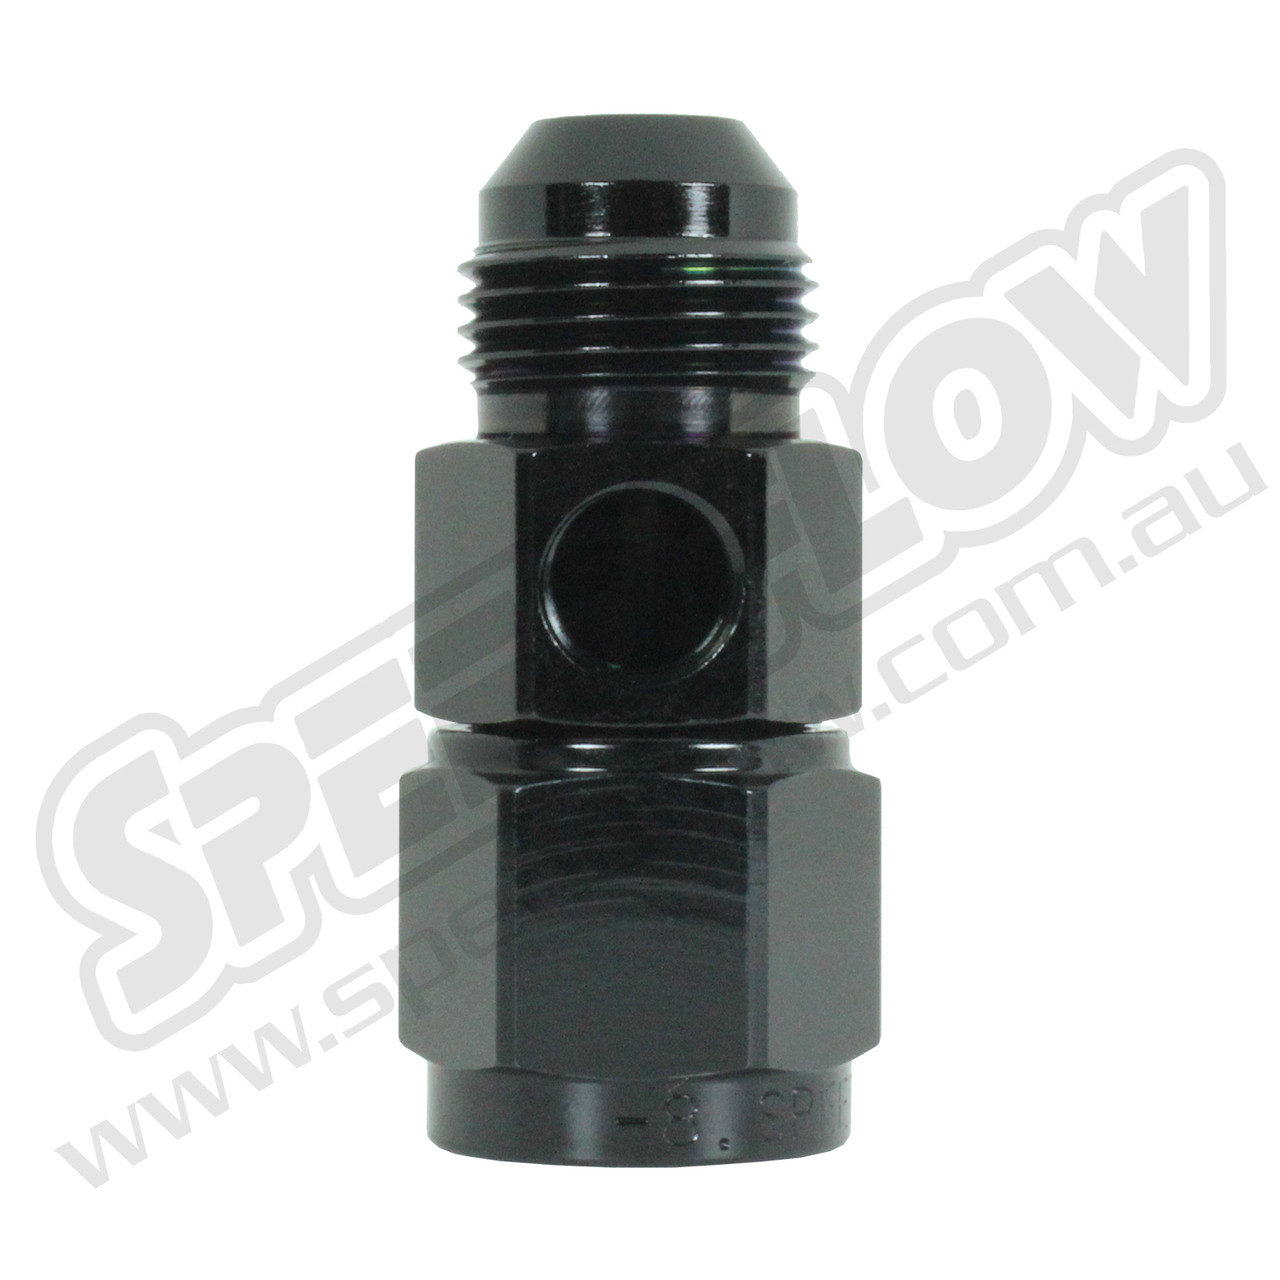 Female to Male with 1/8NPT Port From: - Speedflow Products Pty Ltd